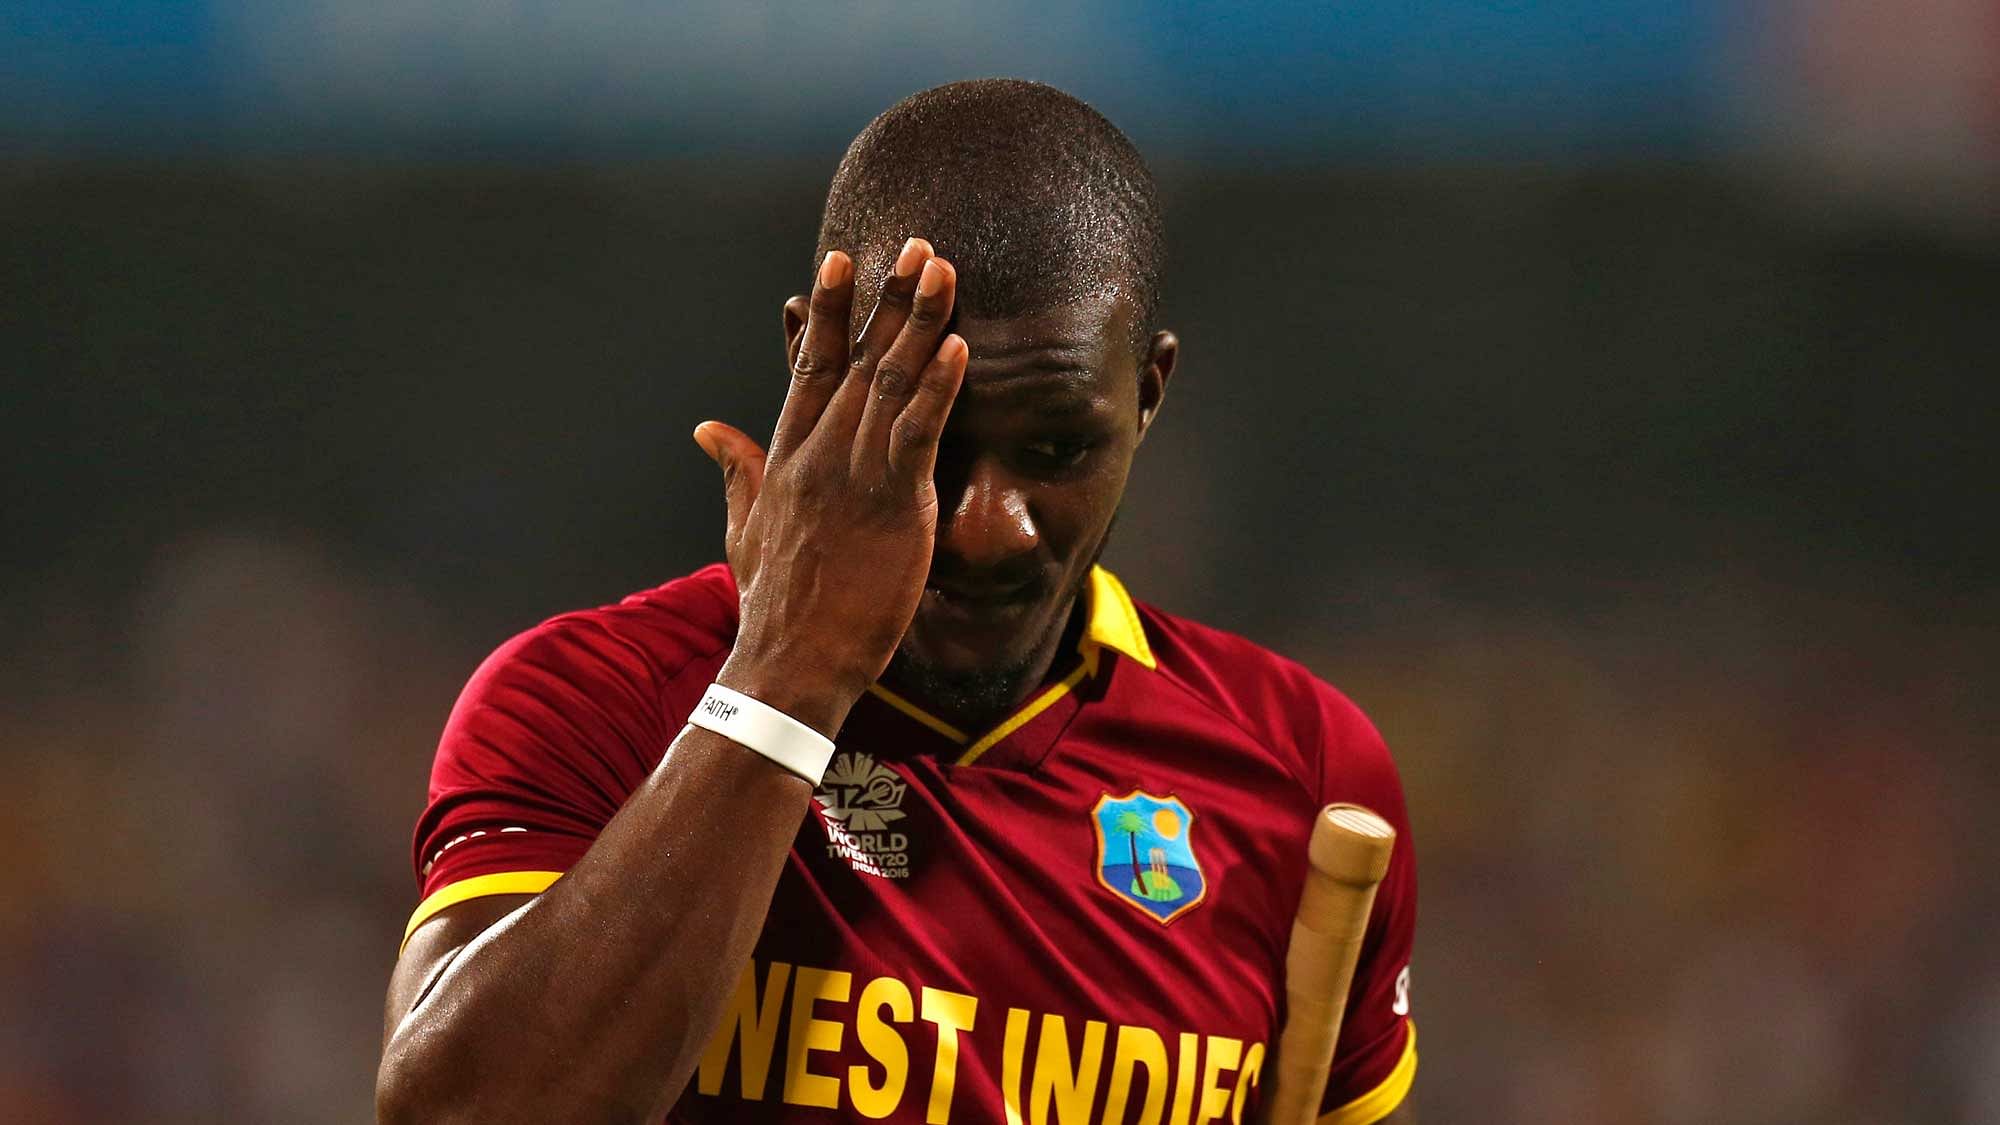 Darren Sammy expressed anger upon realising the meaning of the word ‘kaalu’ which he says was used to refer to him&nbsp; during IPL days.